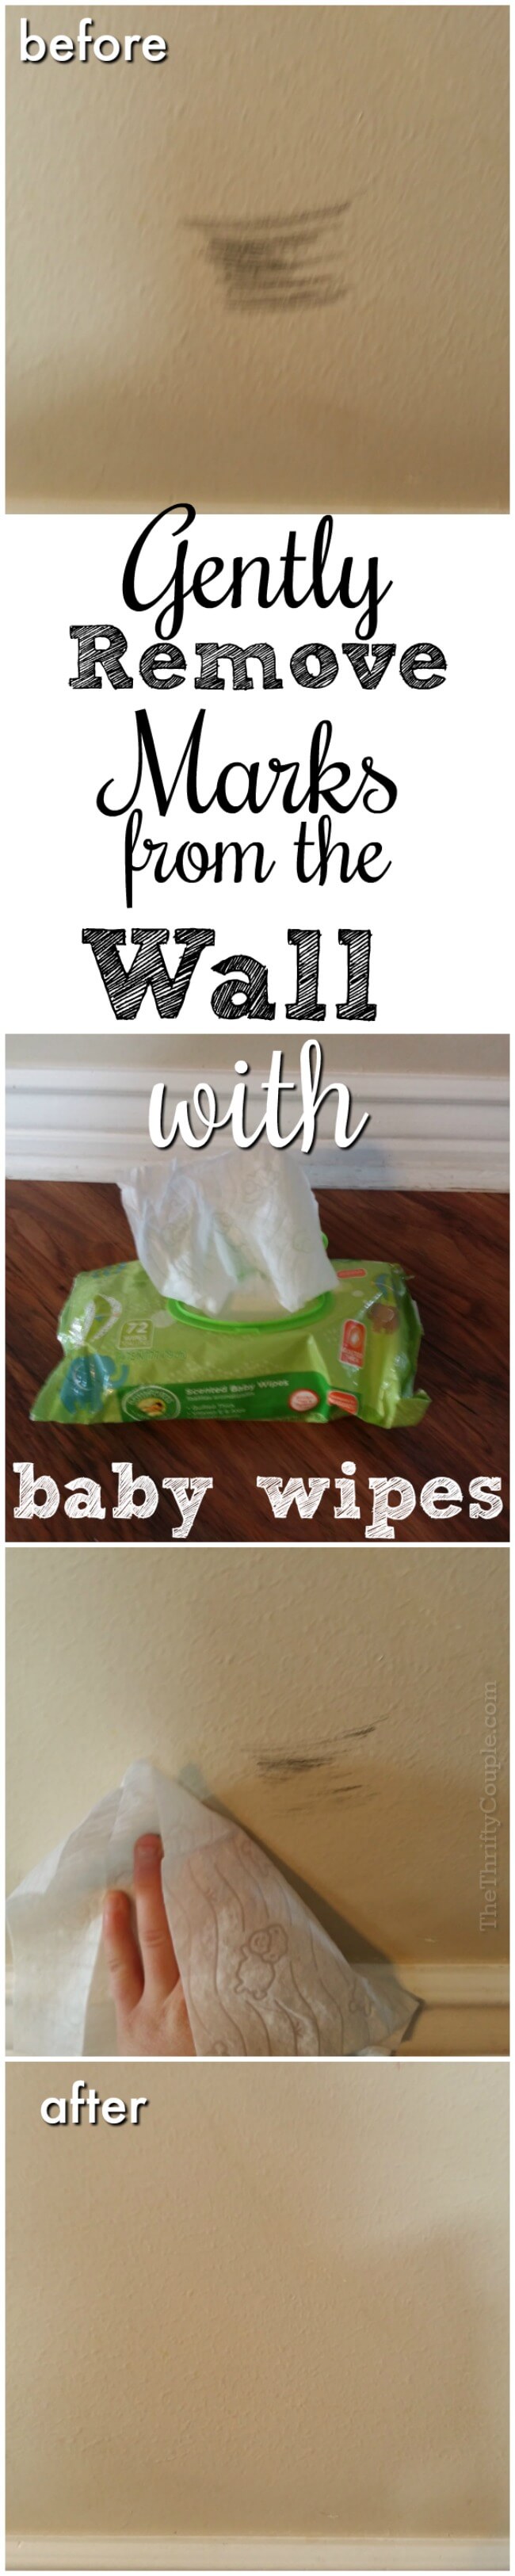 baby wipes remove marks on the wall without damage